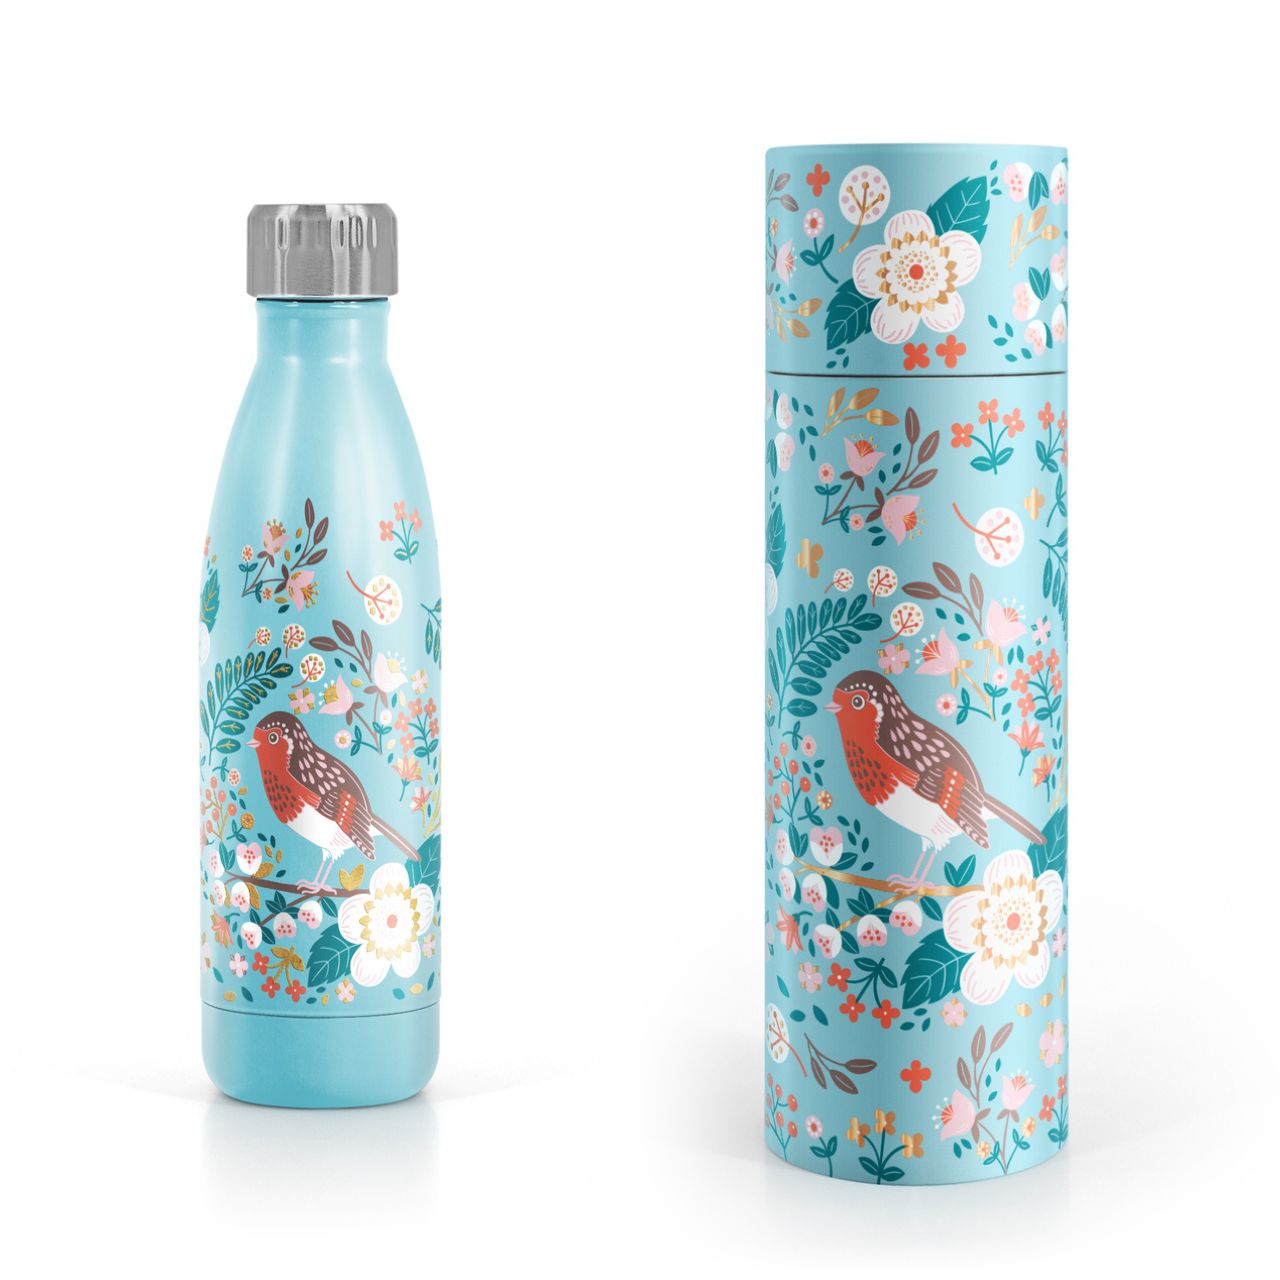 Tipperary Crystal Birdy Metal Water Bottle - Robin  The Birdy Collection is a series of 6 exclusively commissioned illustrations inspired by native Irish birds; Bullfinch, Goldfinch, Blue tit, Greenfinch, Kingfisher and Robin.